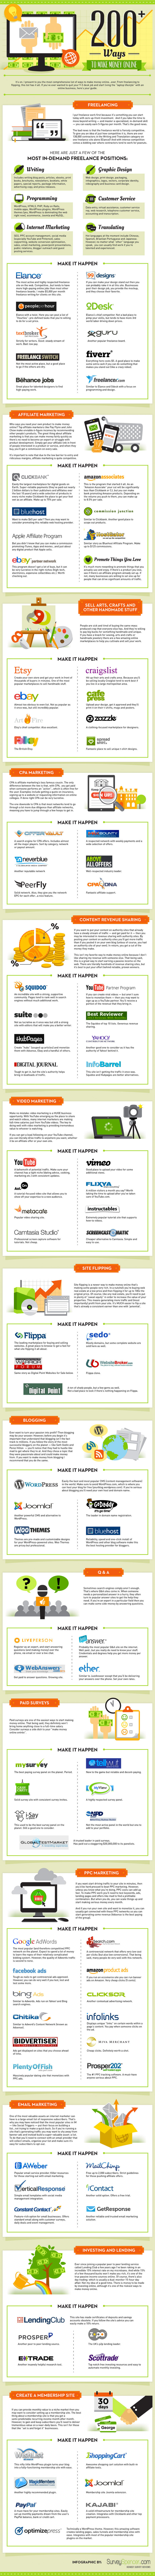 200-ways-to-make-money-online-from-home-infographic